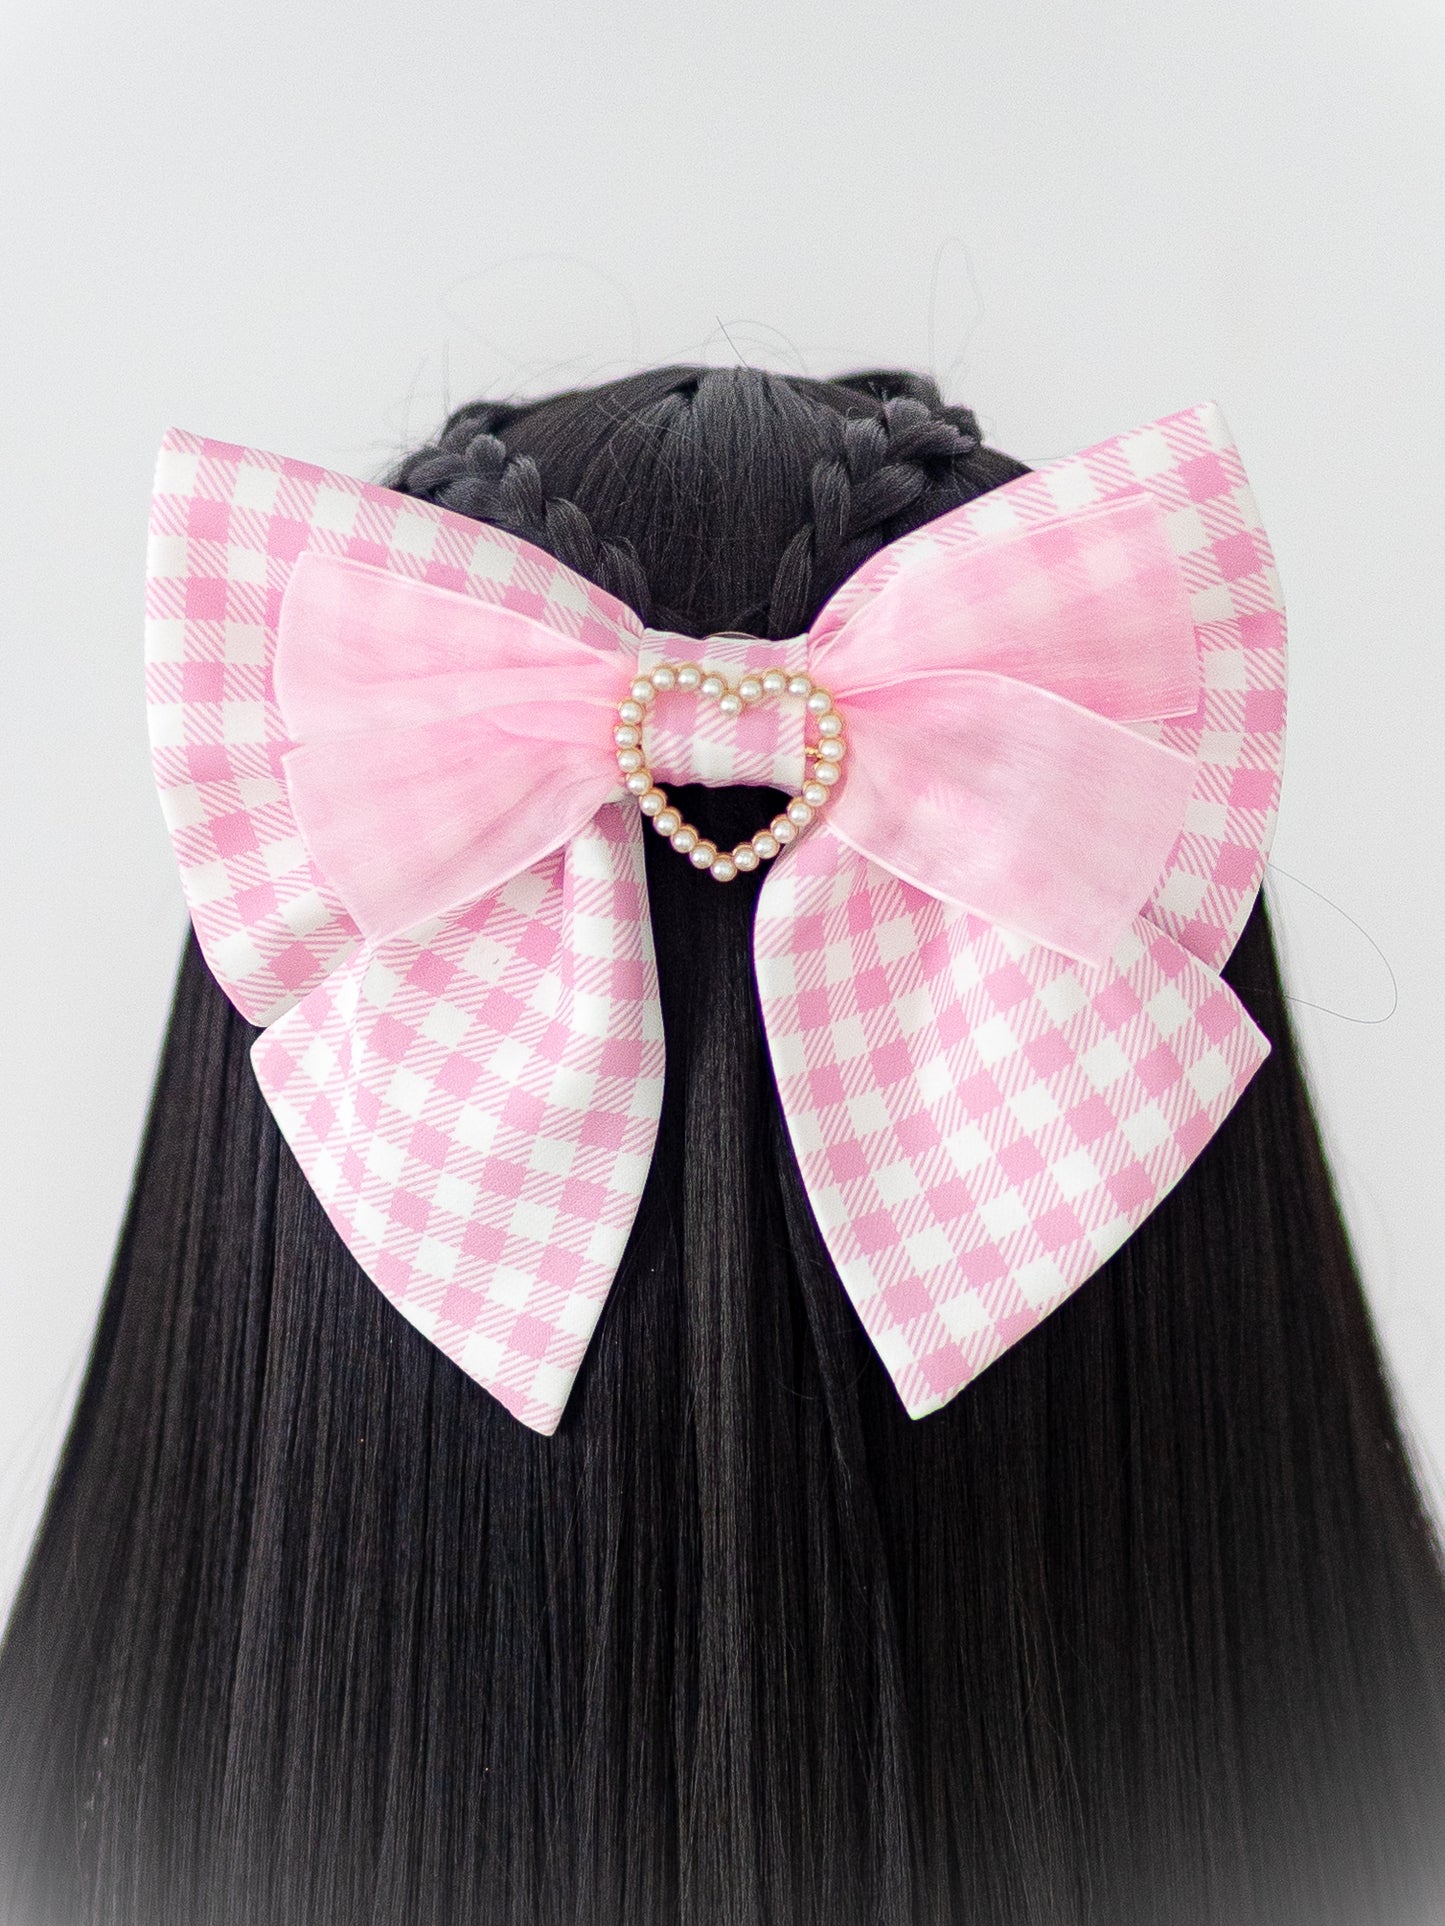 Gingham heart hairbow/pin [Strawberry Bunny]